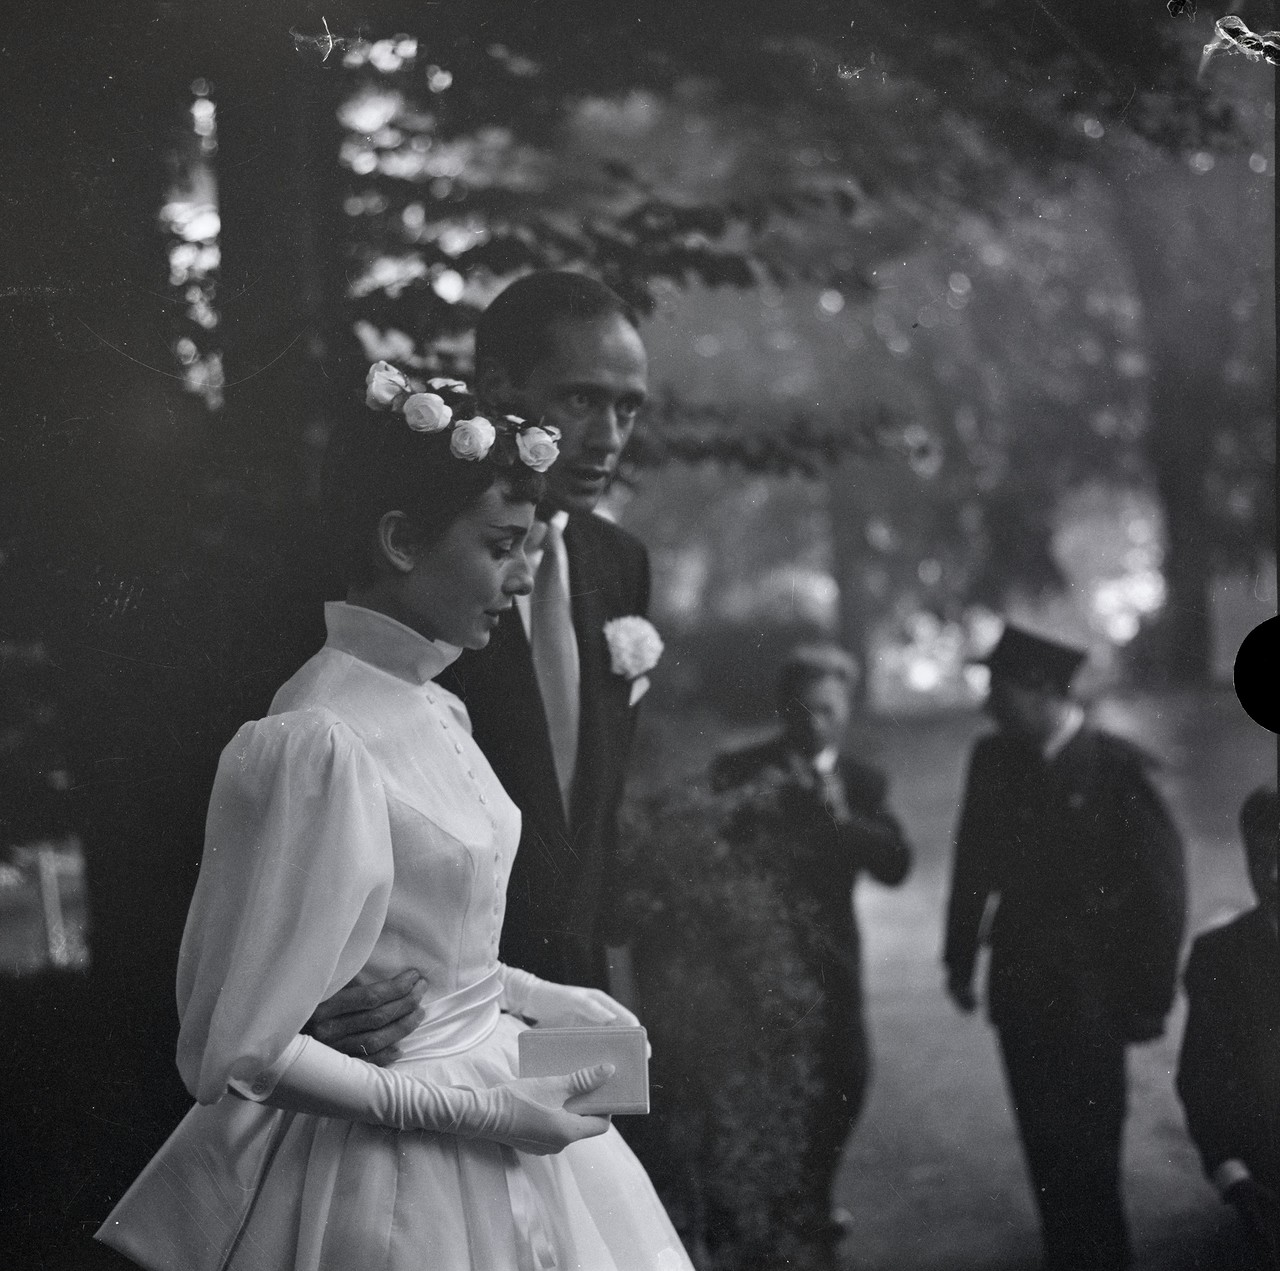 Rare Photographs of Audrey Hepburn and Mel Ferrer on Their Wedding Day